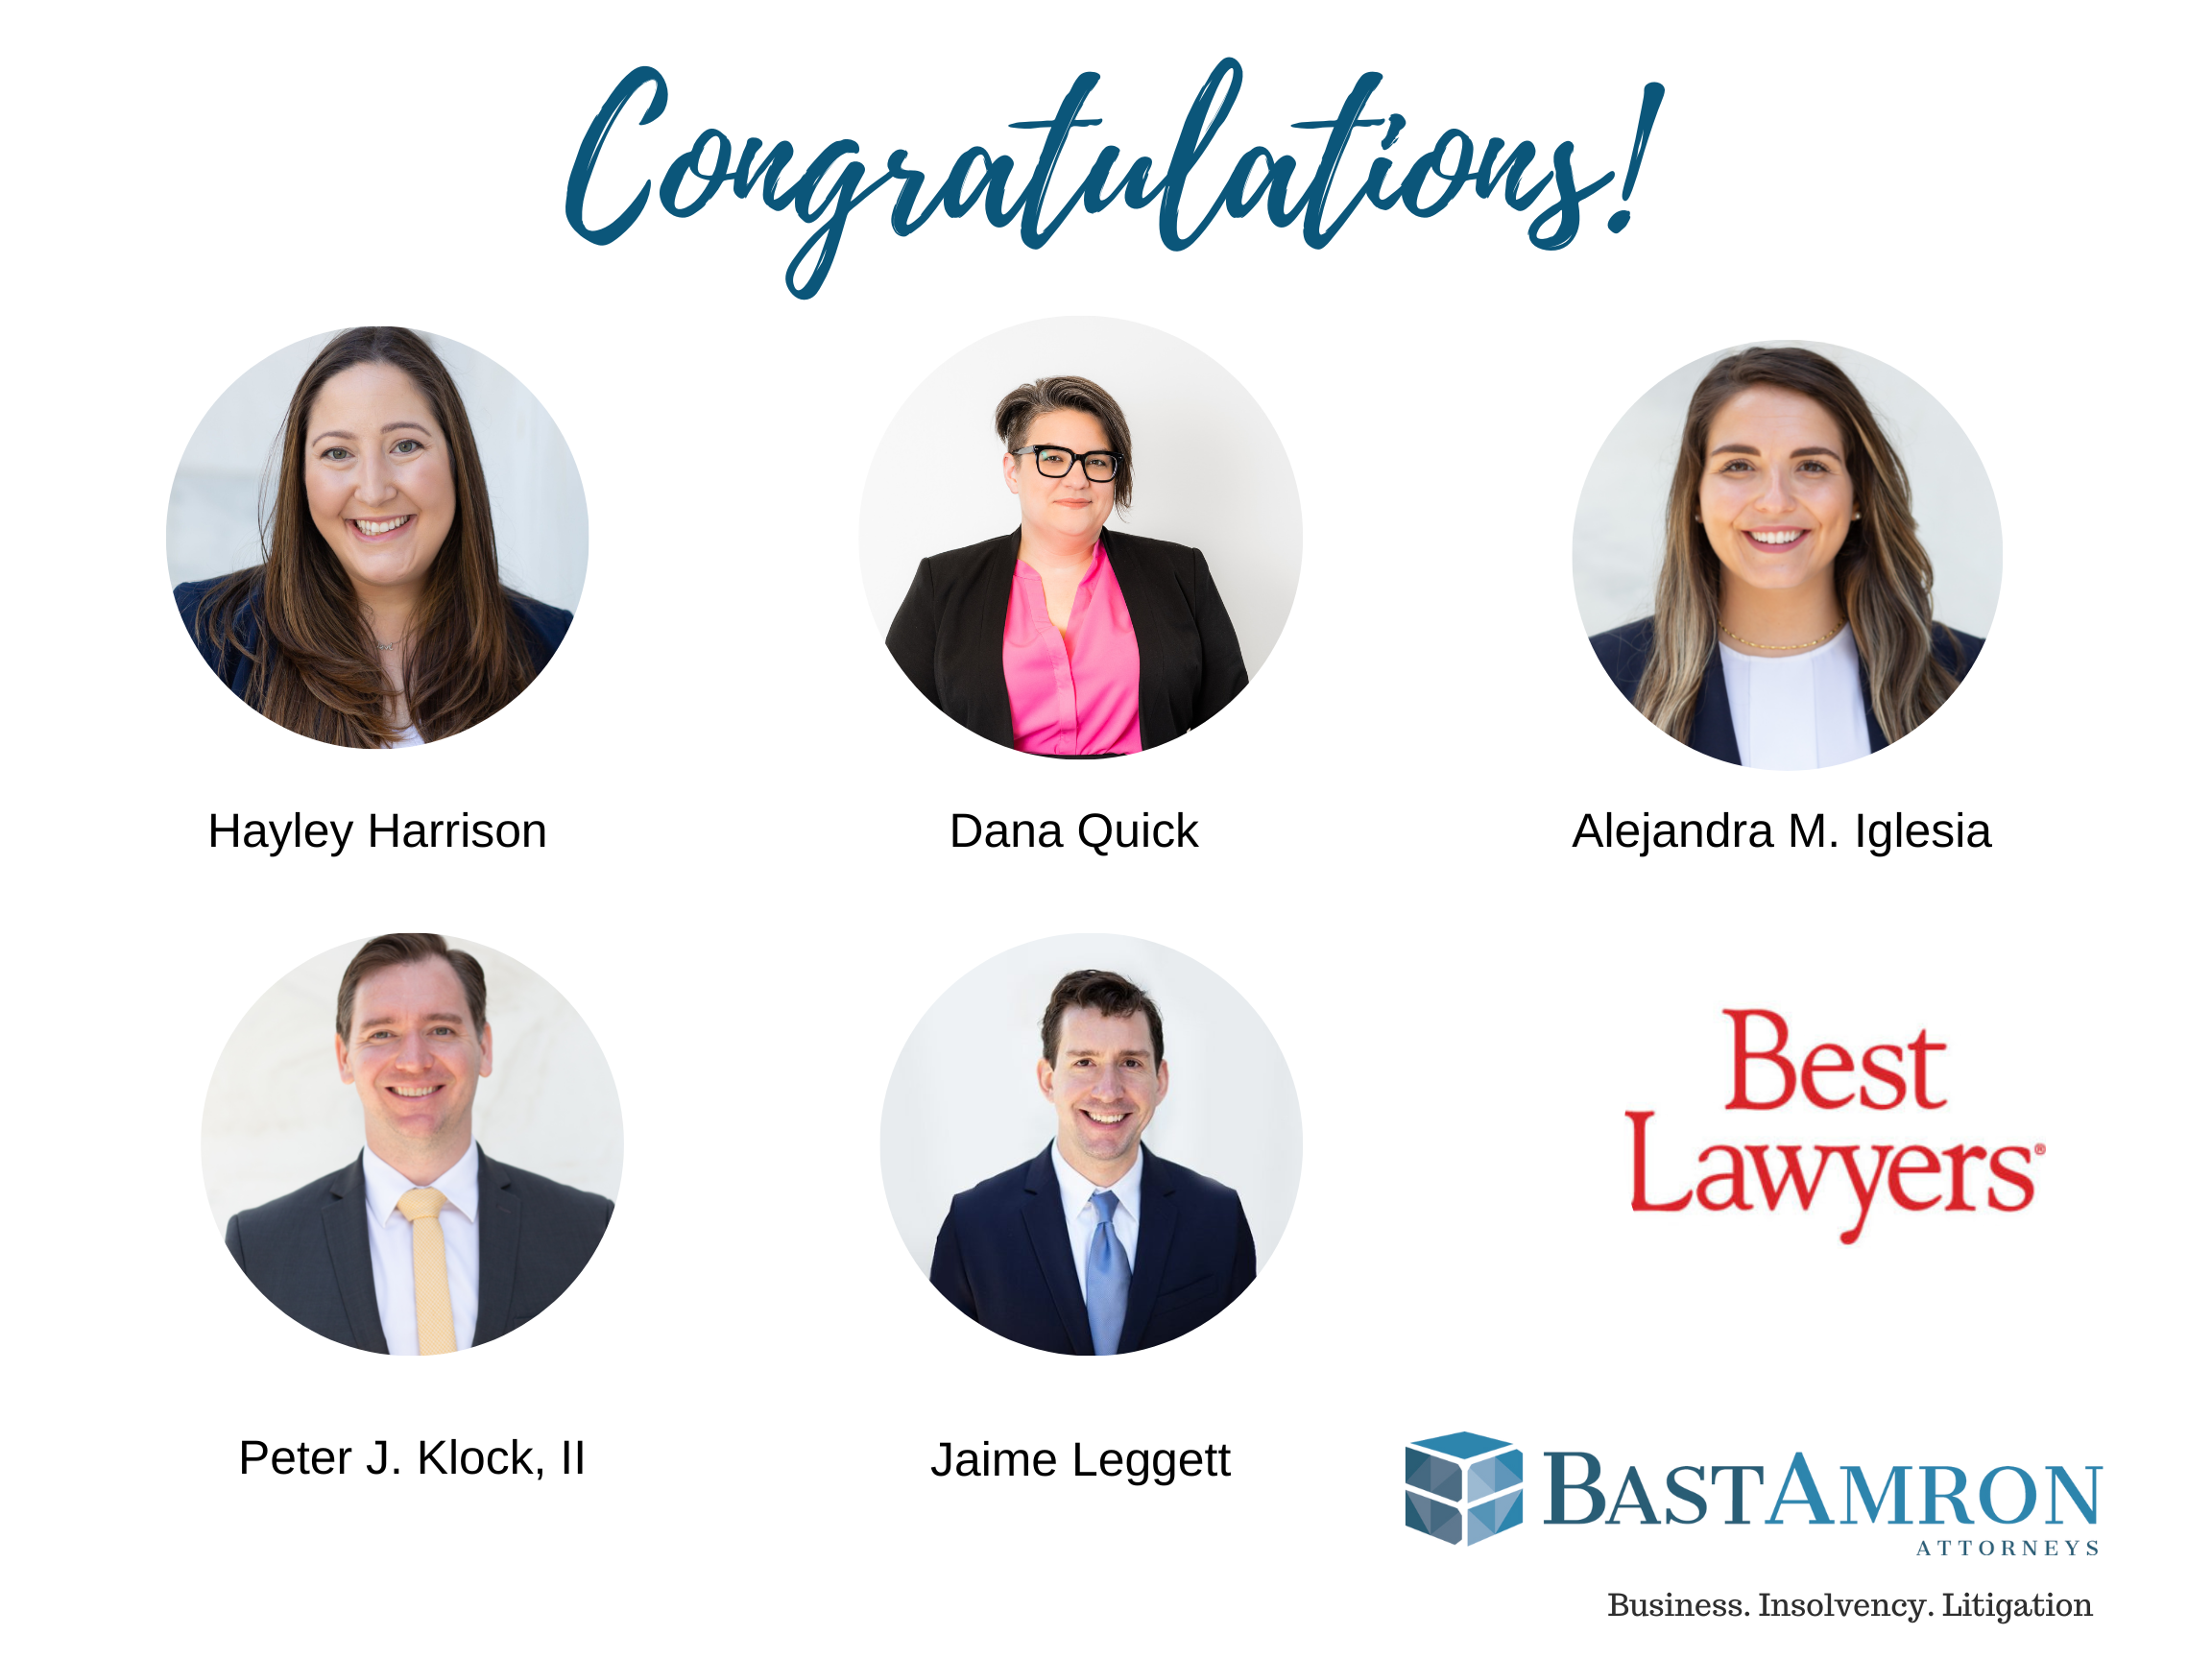 5 BAST AMRON ATTORNEYS INCLUDED IN 2023 BEST LAWYERS IN AMERICA® “ONES TO WATCH”